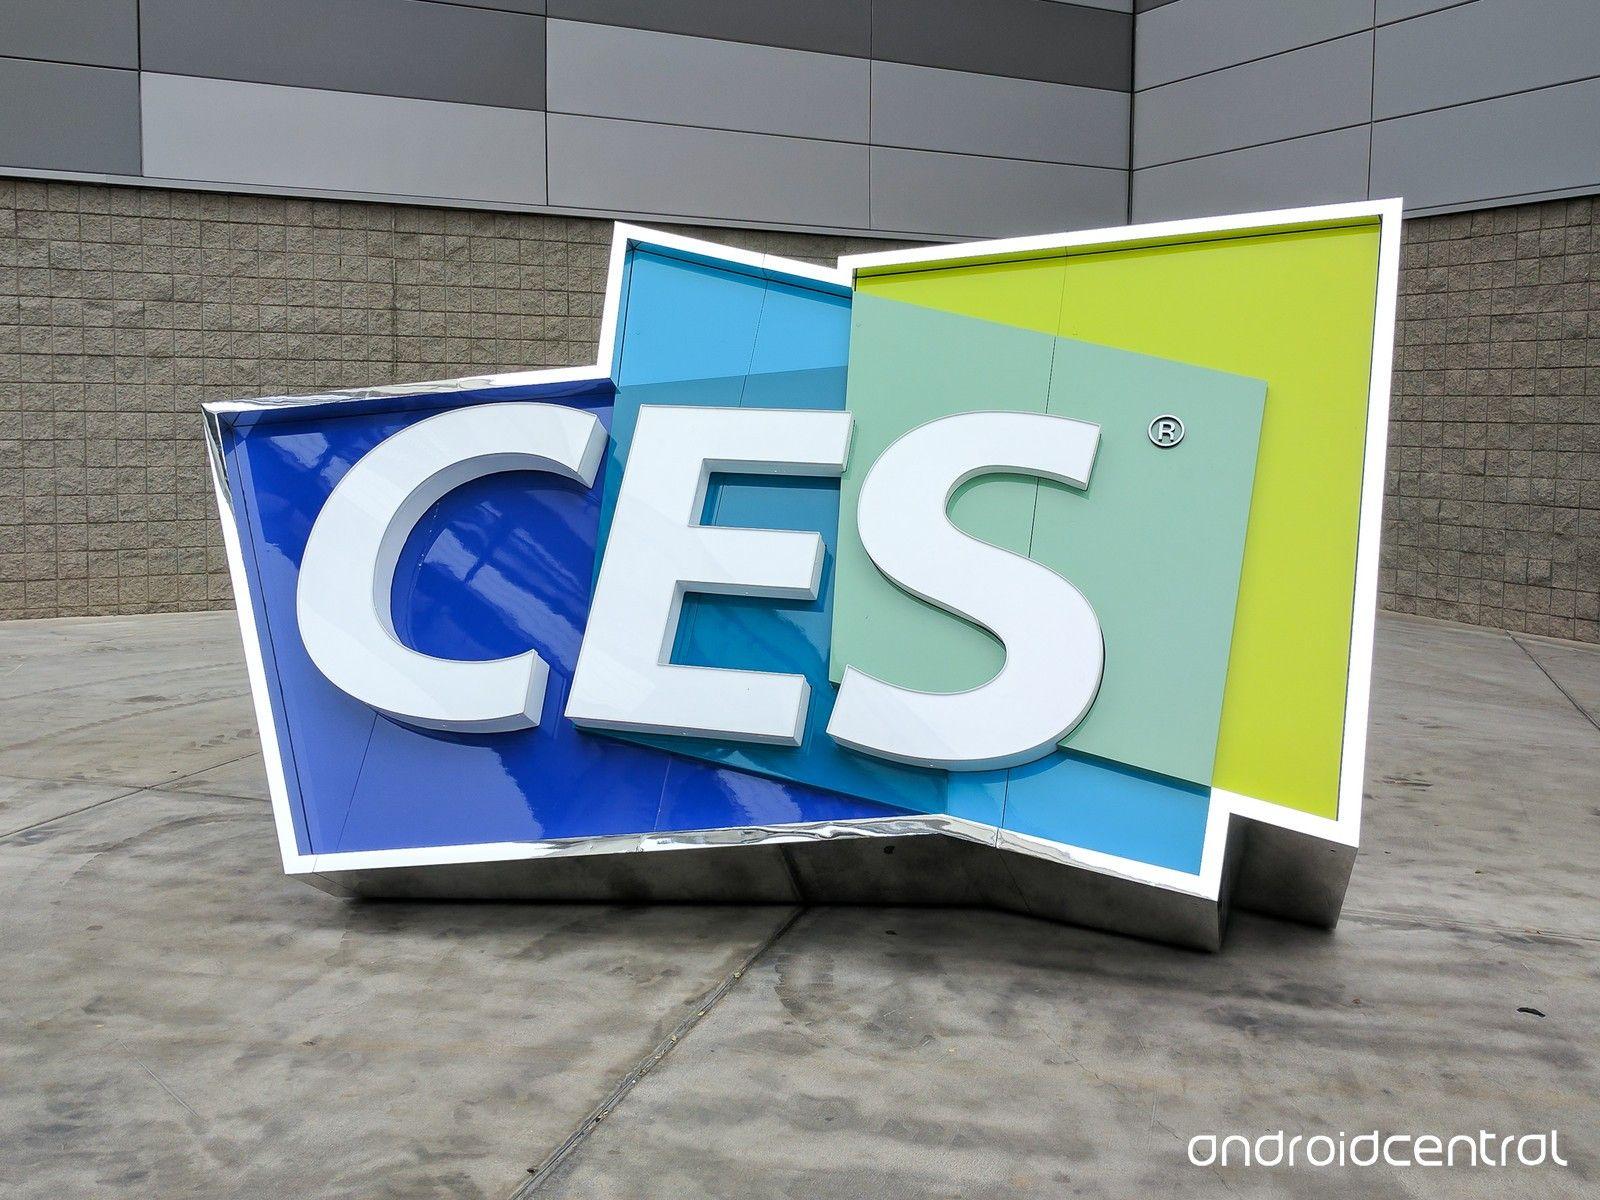 CES 2019 preview: Setting the stage for the year's technology trends